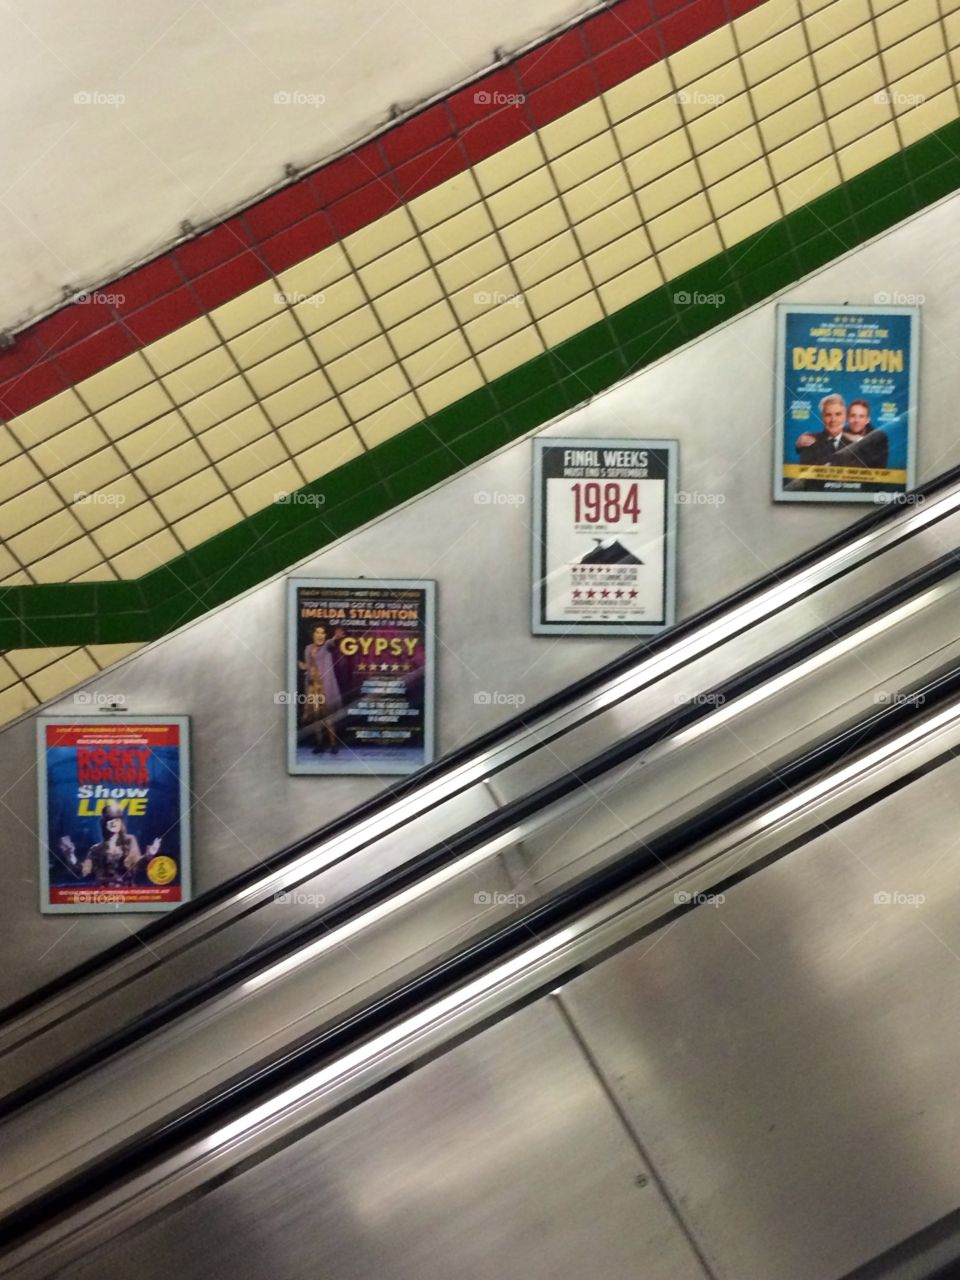 Underground Ads. The interior of many tube stations in London feature these local ads for West End shows. Something pleasing about it!
